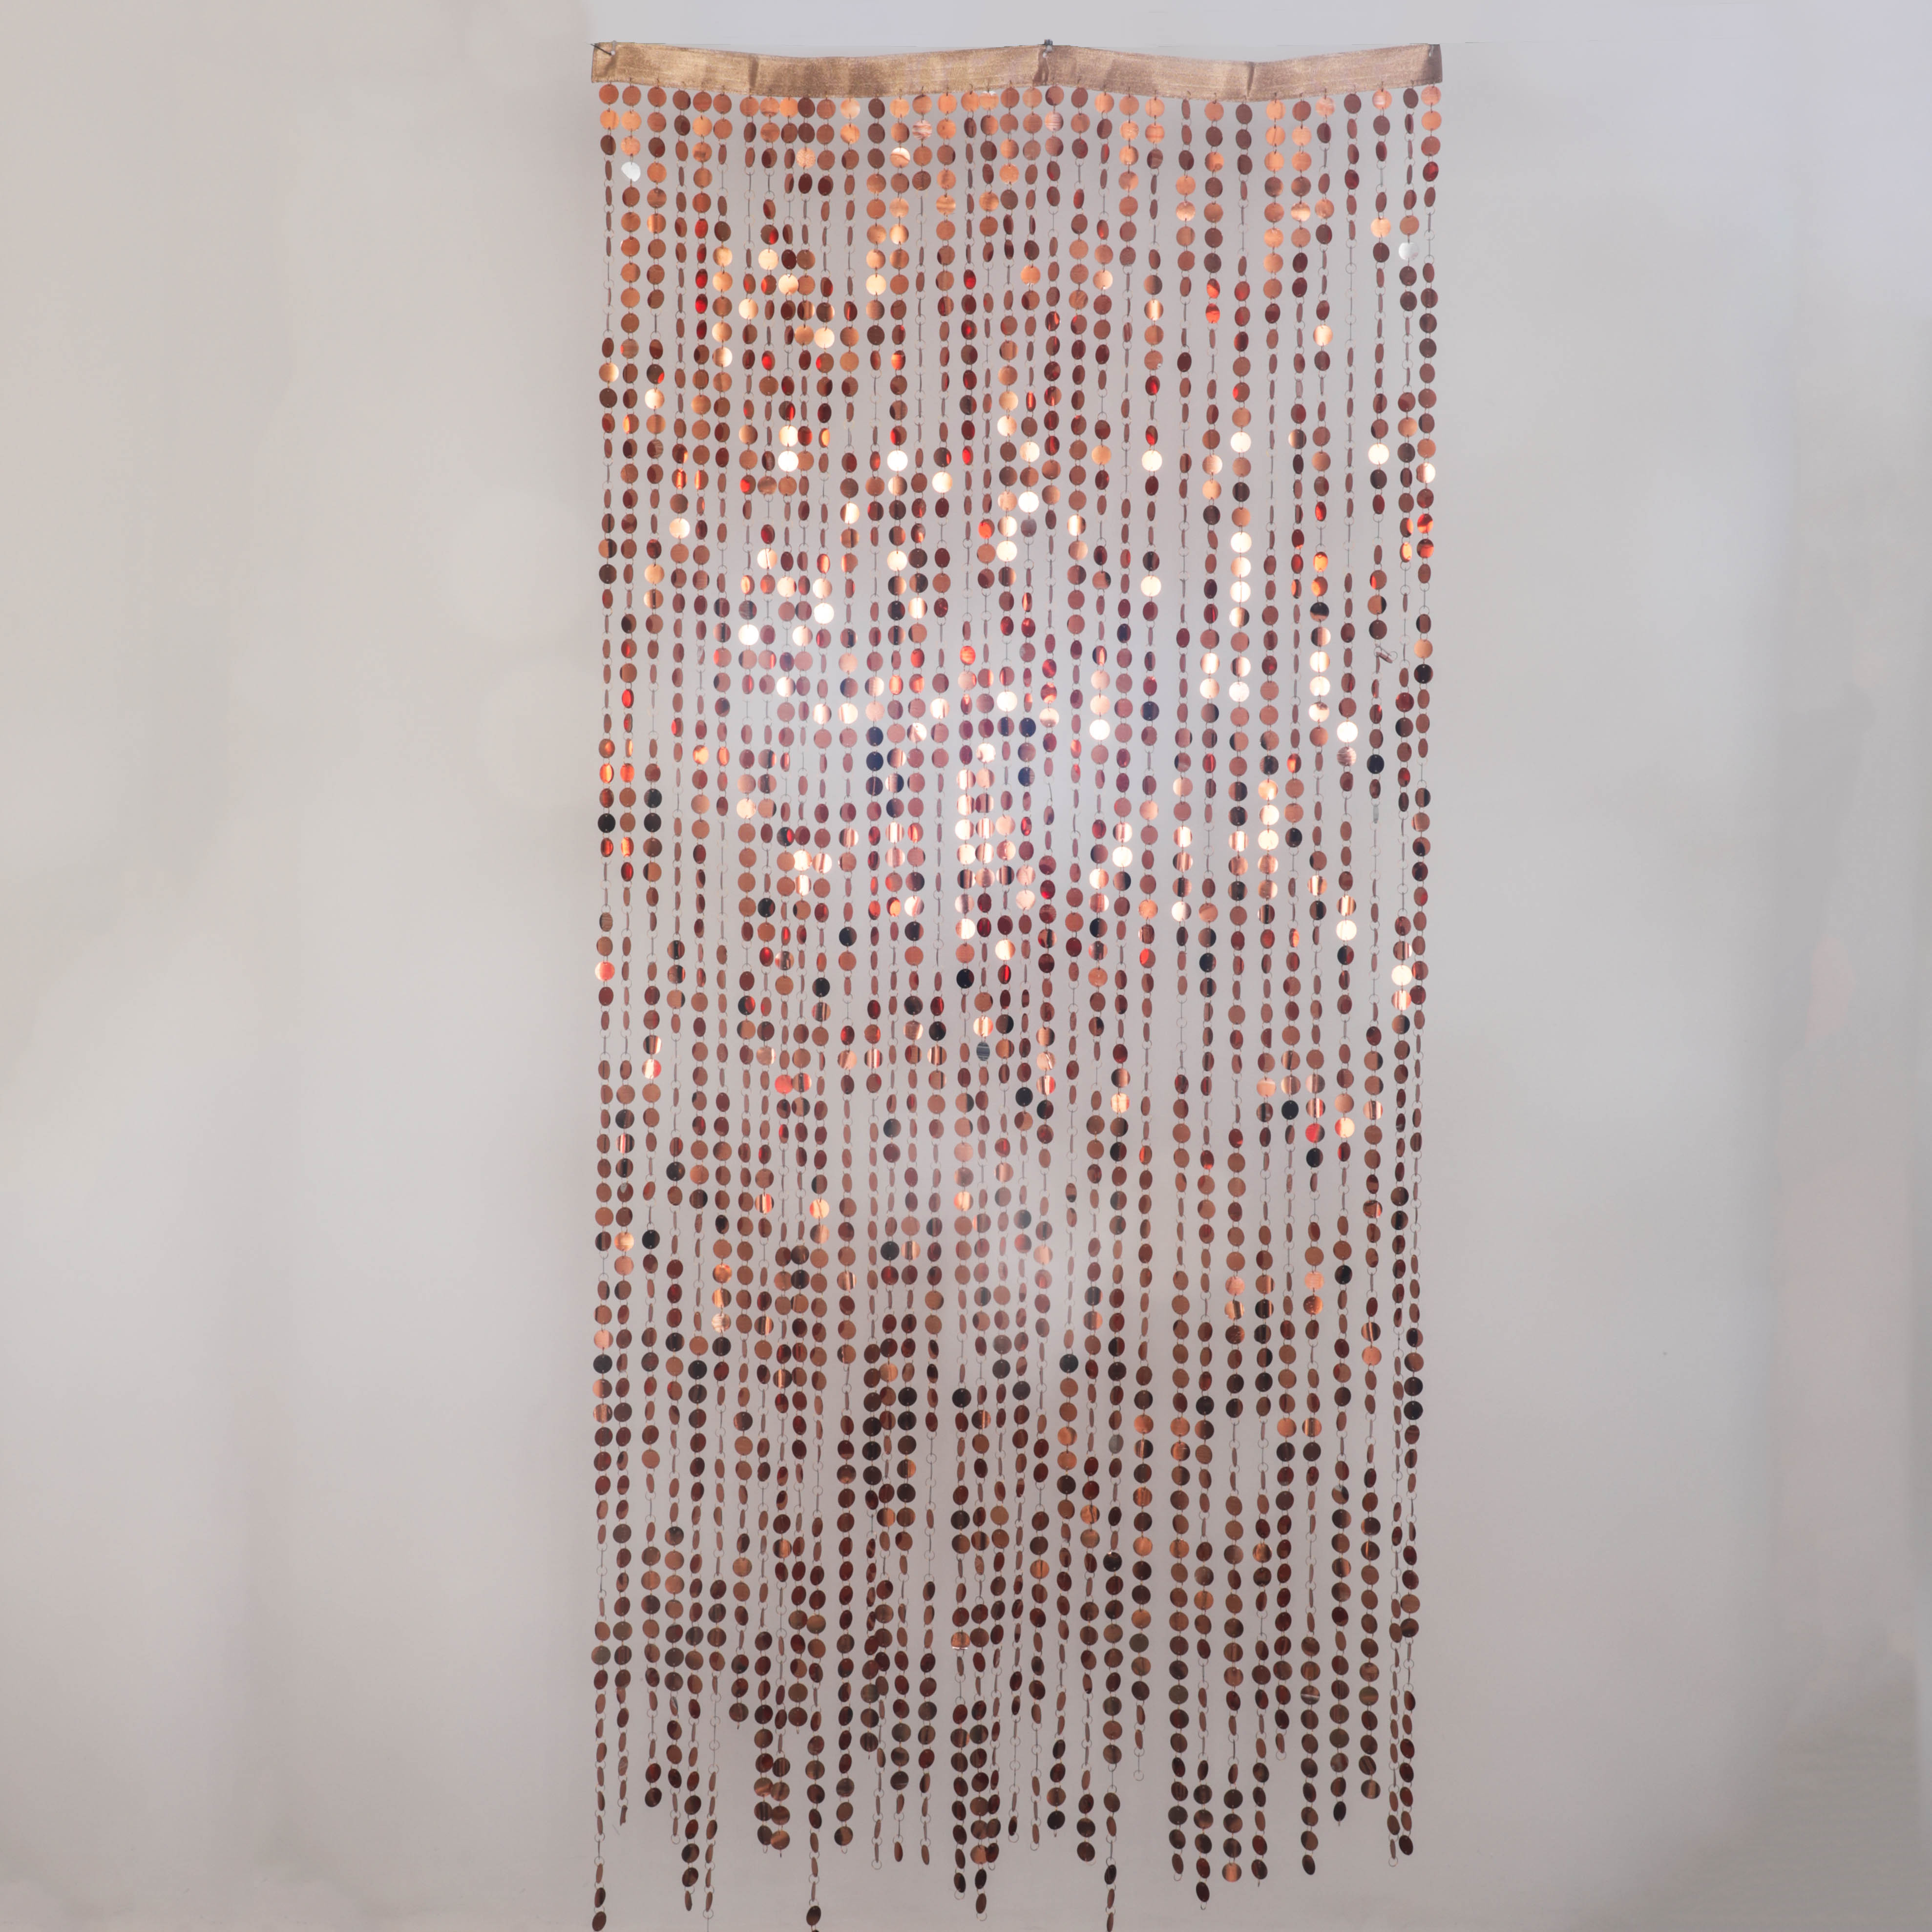 Shiny beaded curtain for party decorations